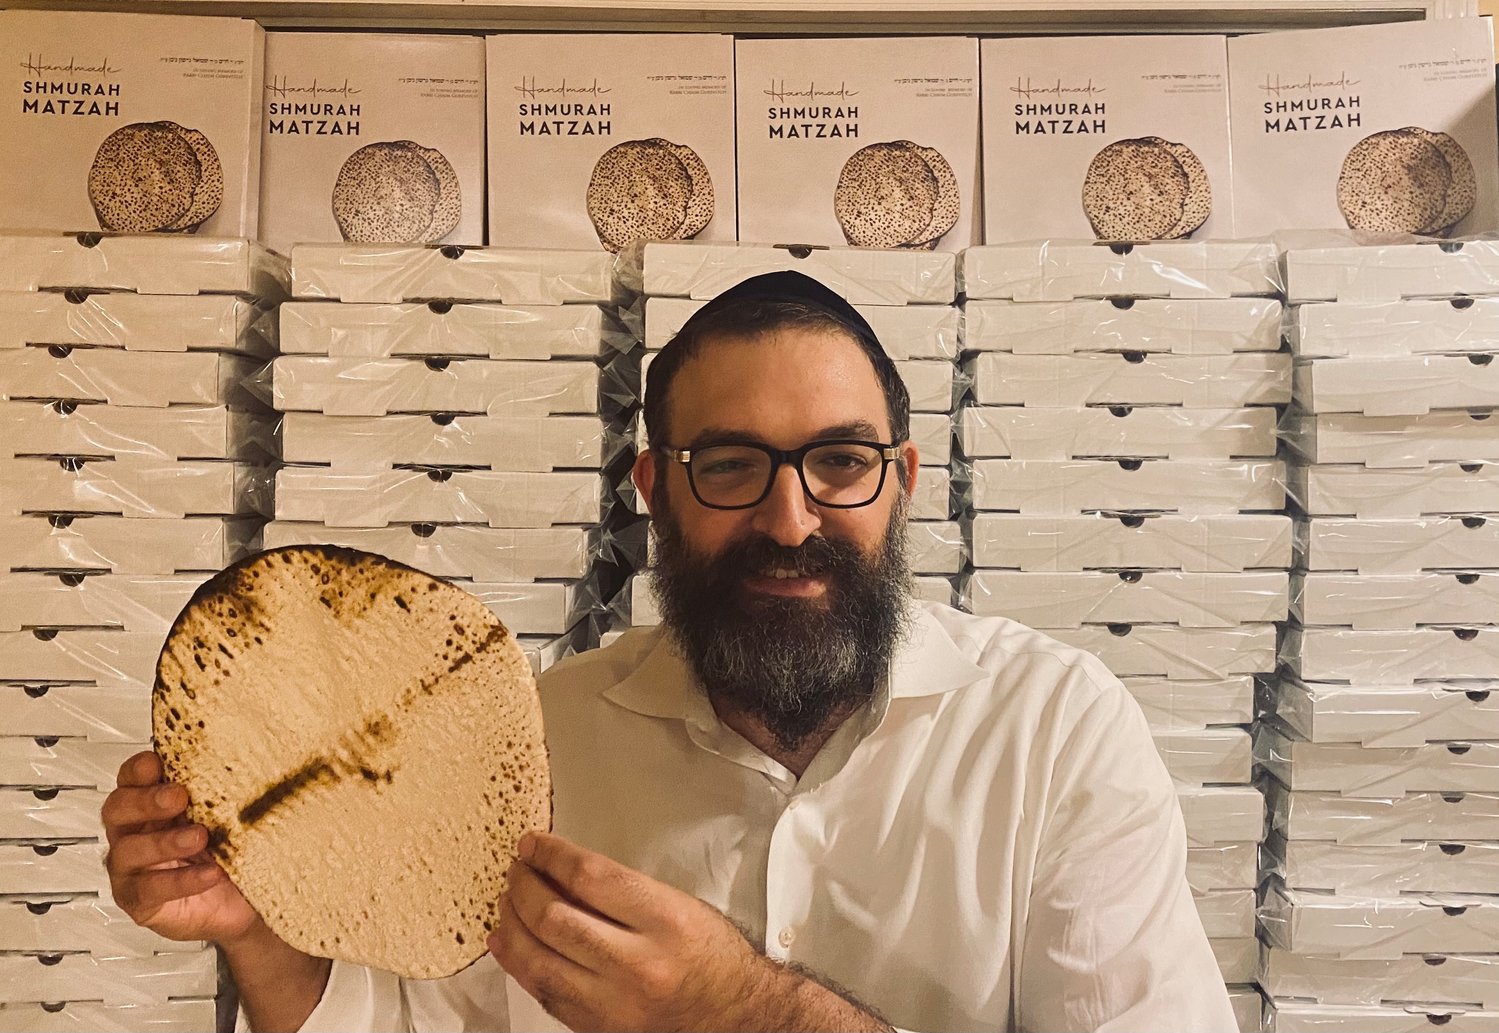 Rabbi Shimon Stillerman of the Chabad of Islip Township holds matzah from Ukraine that will be distributed to homes in the Islip area.